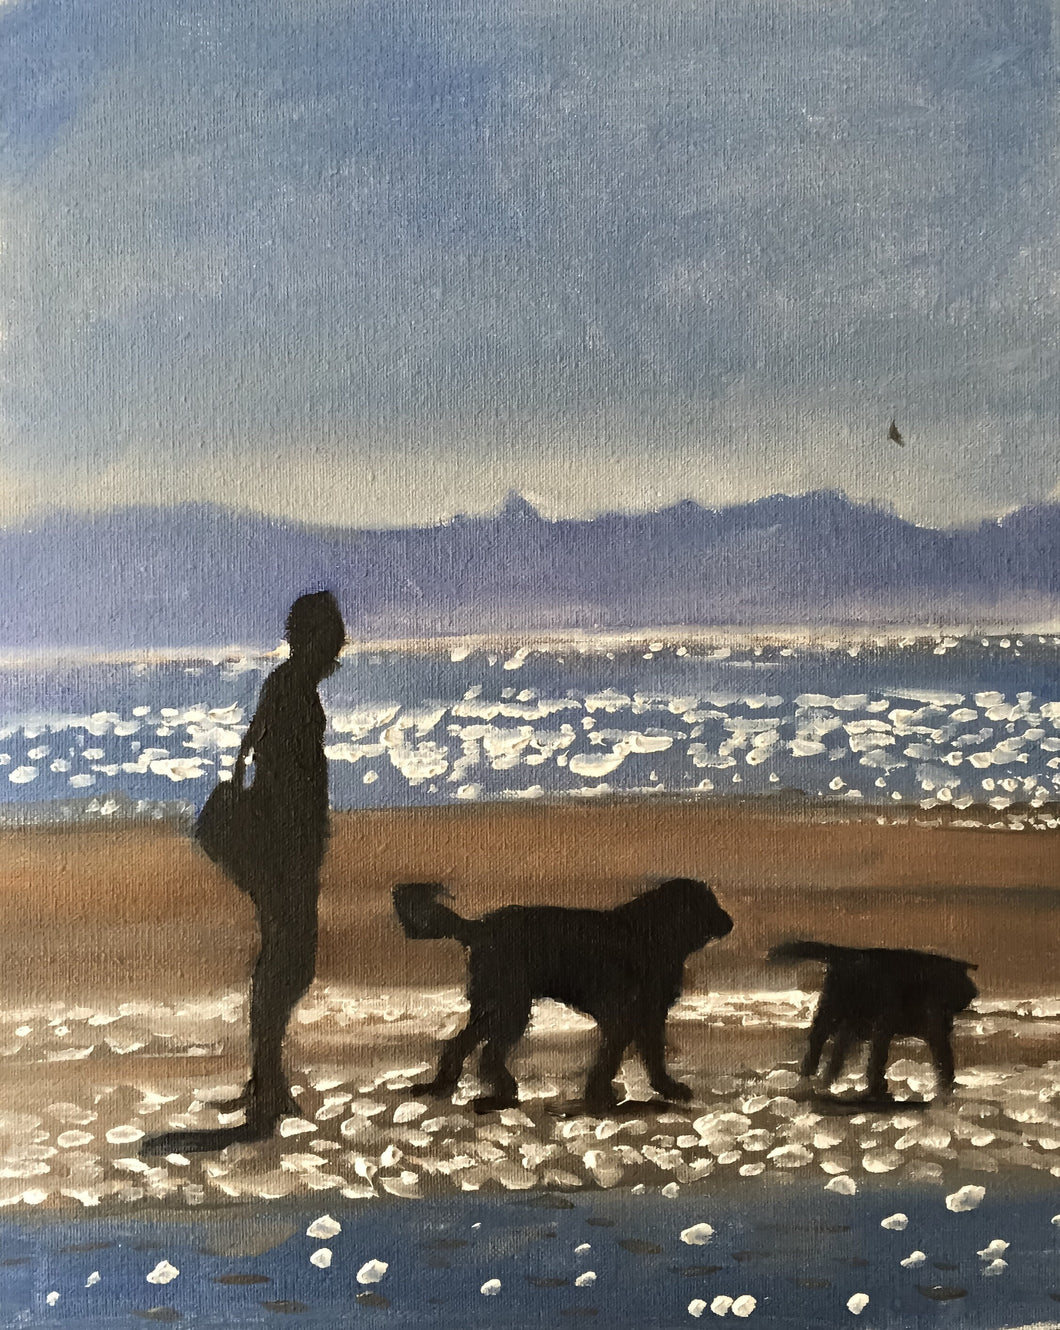 Dogs on beach Painting,  Beach art, Beach Prints, Fine Art - from original oil painting by James Coates